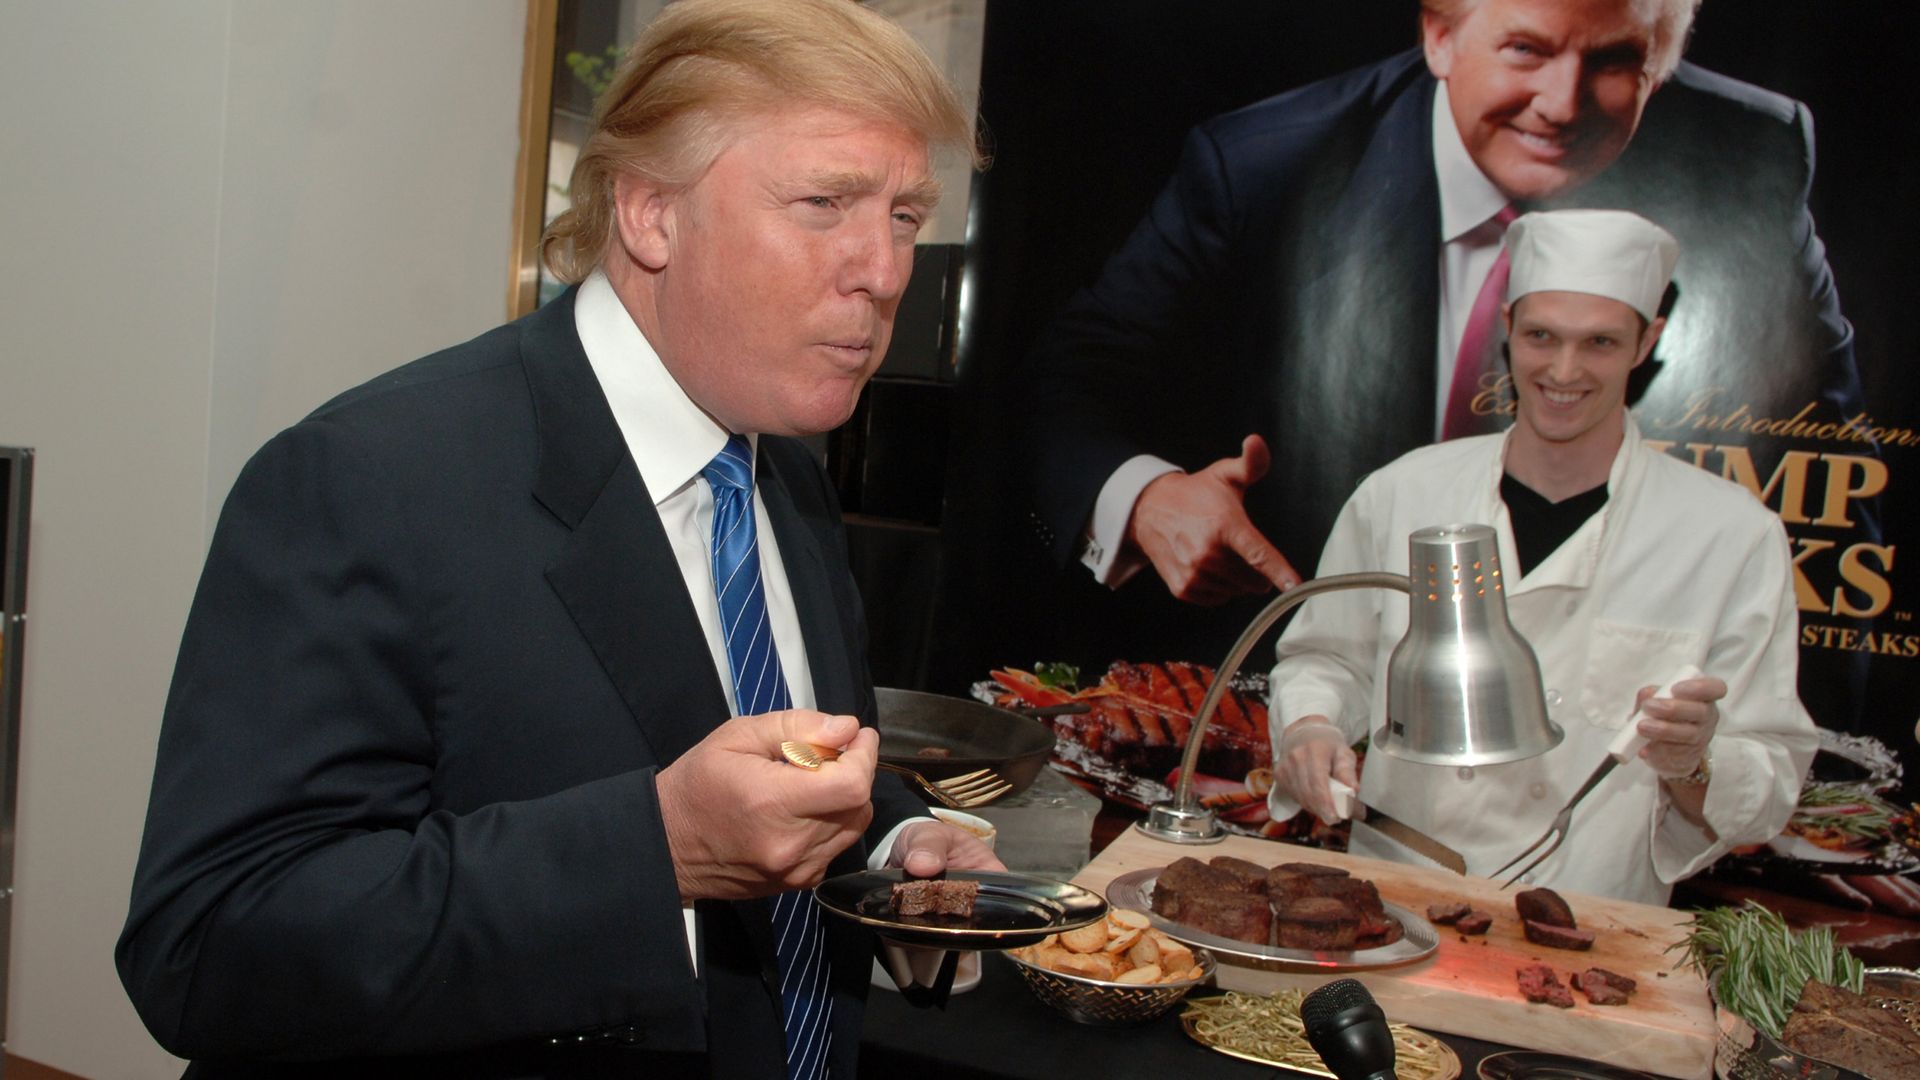 Donald Trump during Launch of Trump Steaks at The Sharper Image.